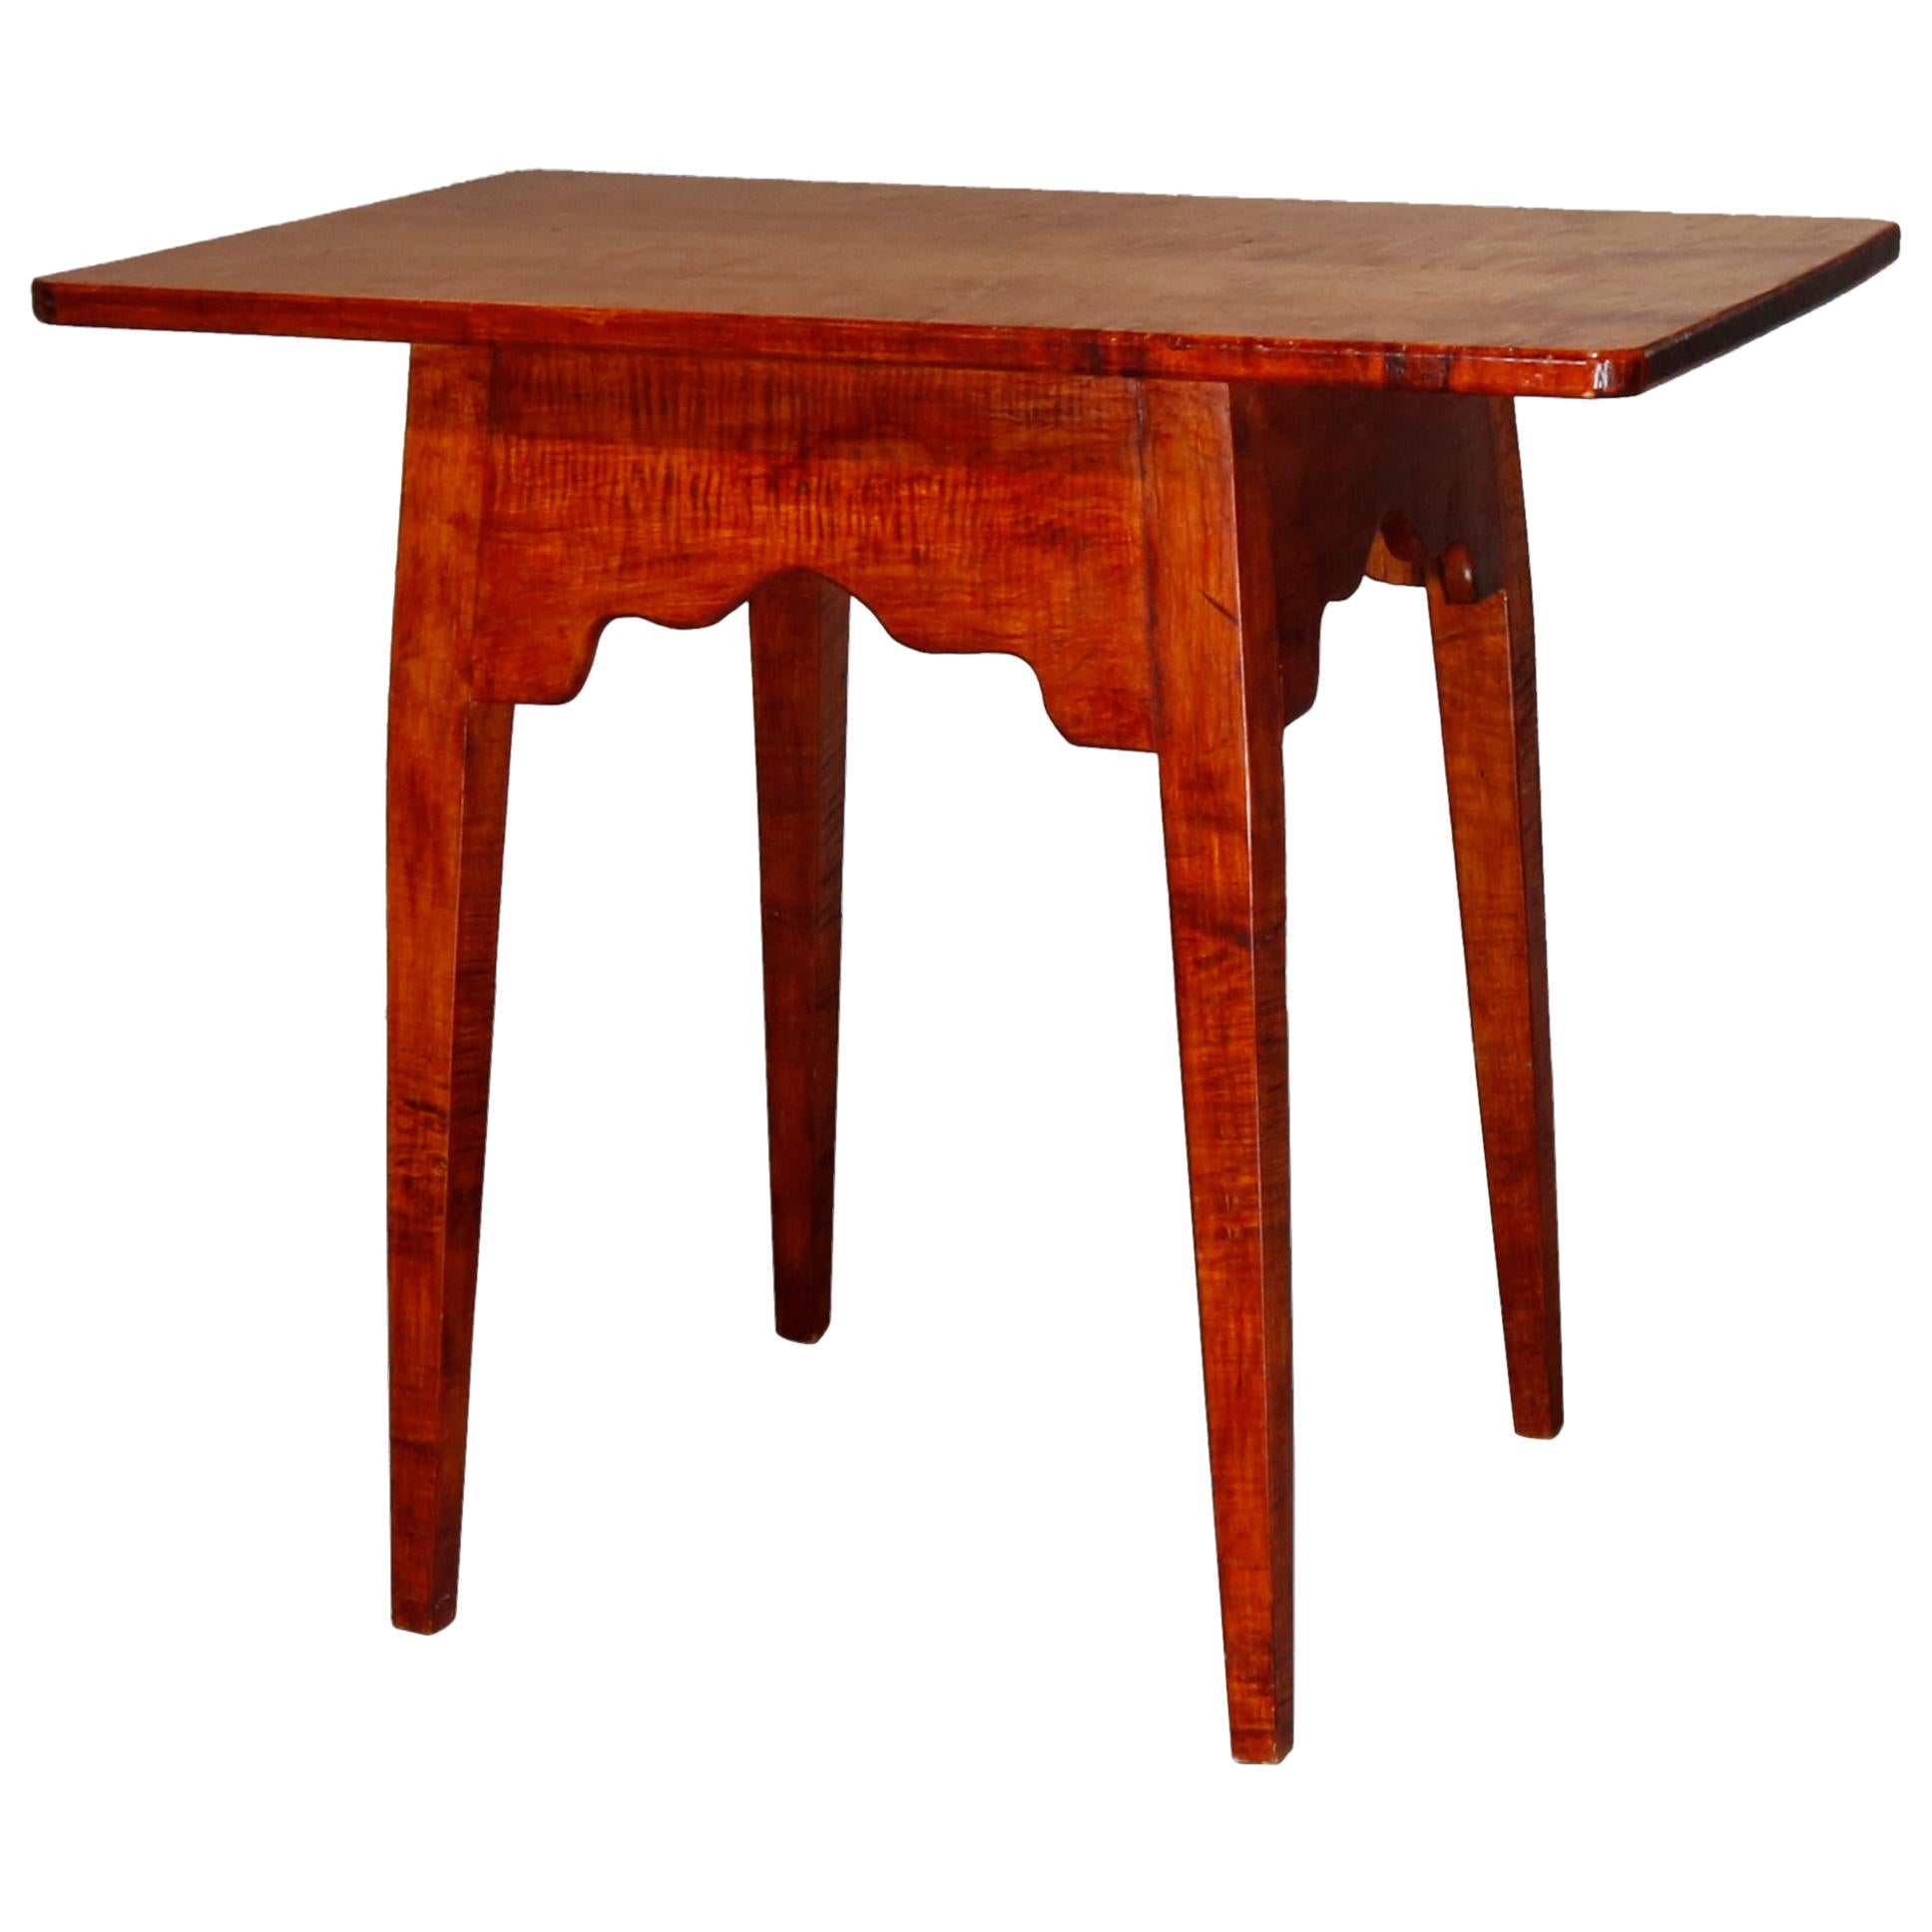 Hepplewhite Style Tiger and Birds Eye Maple Work Table, 20th Century